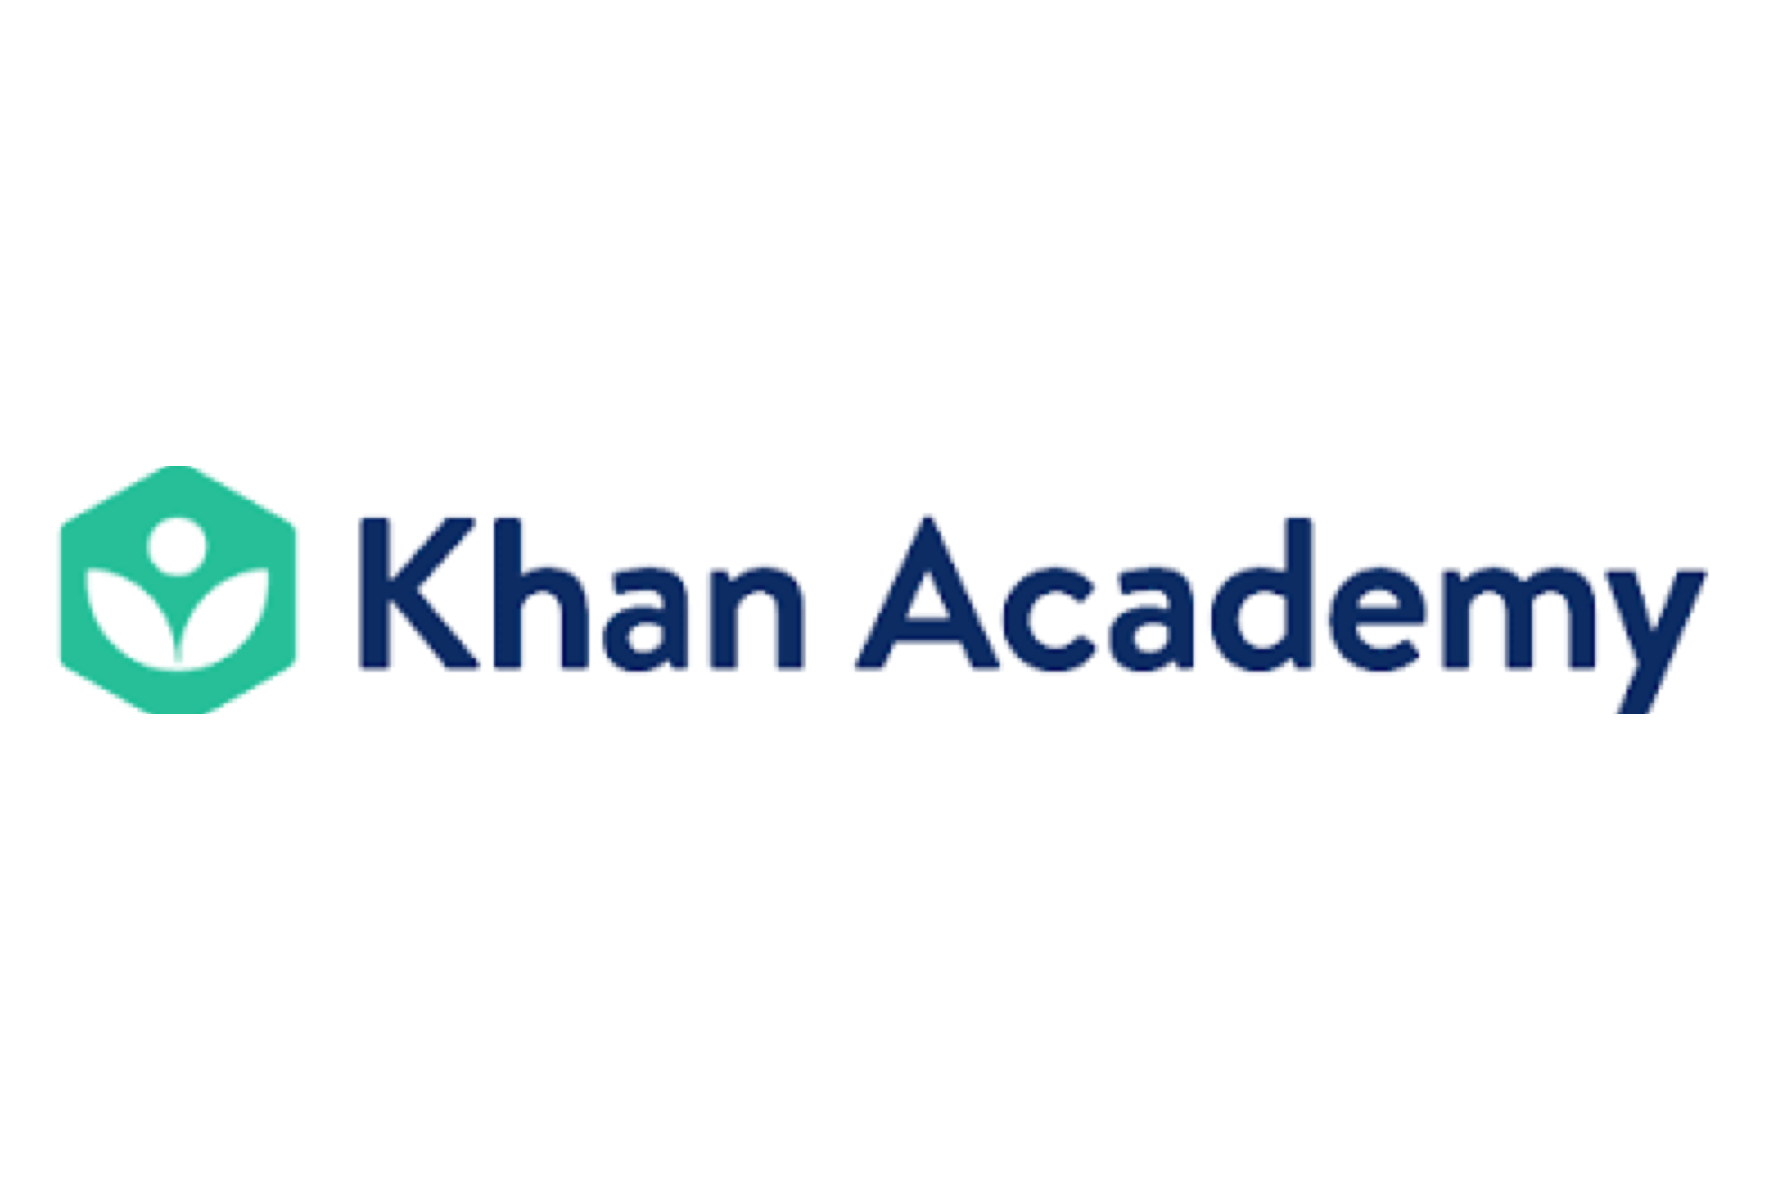 Khan Academy Announces New Mastery Learning Features | Distance ...